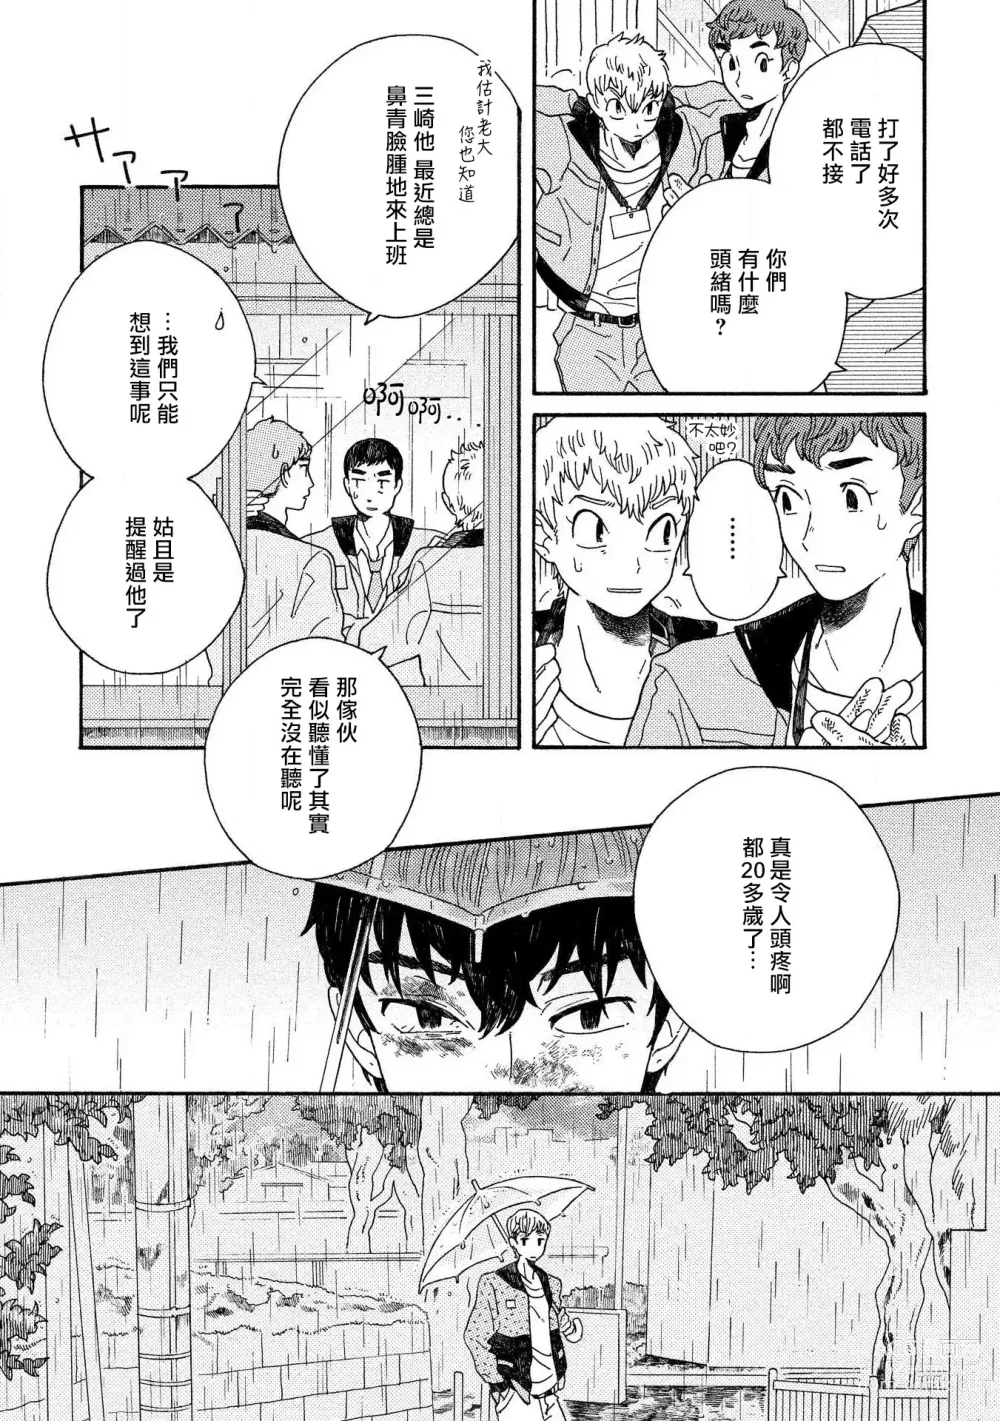 Page 16 of manga Sneaky Red Ch. 1-2